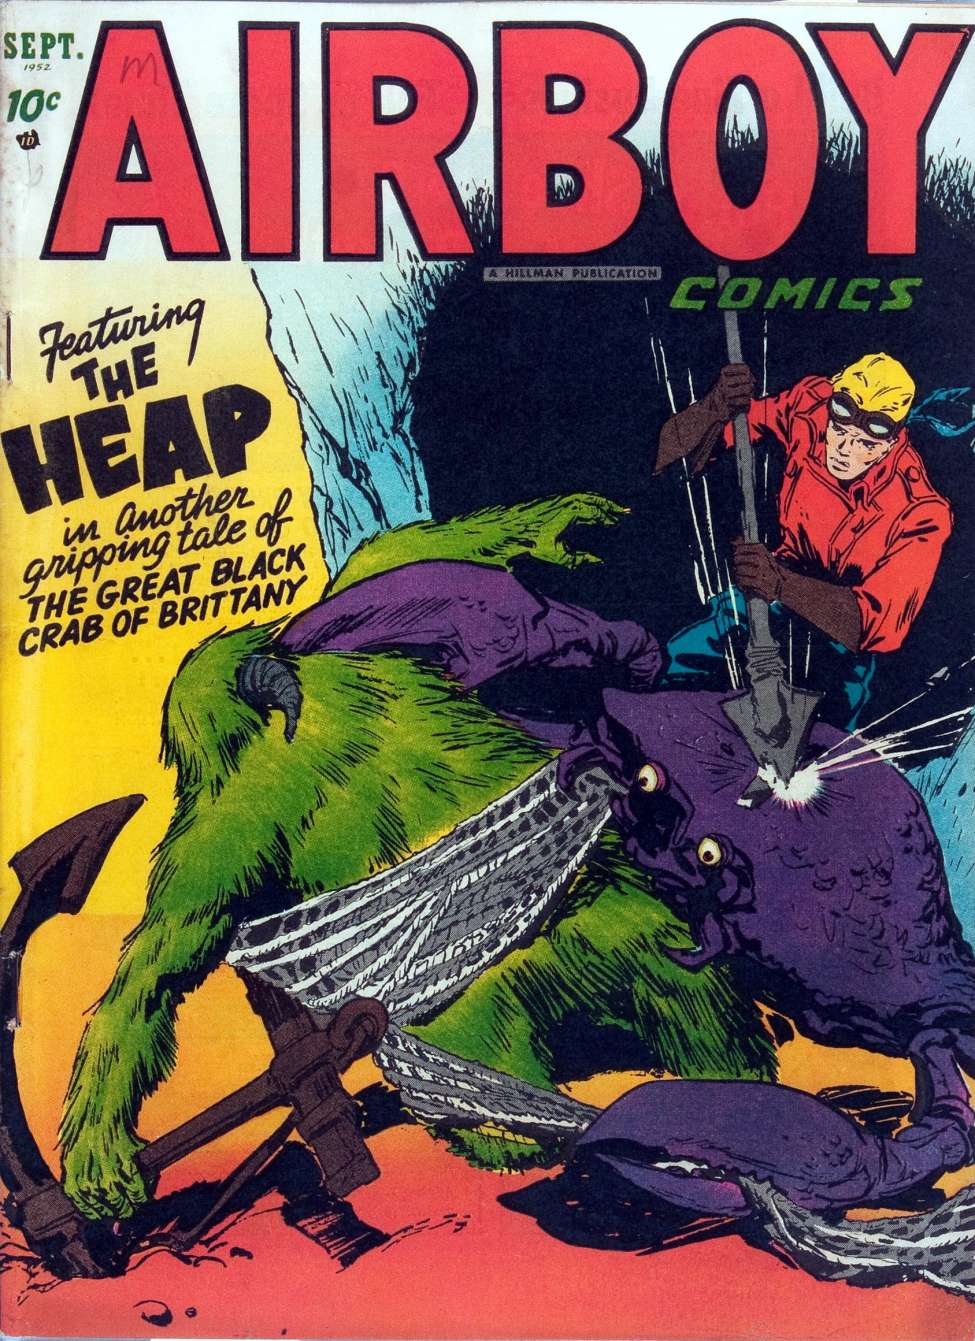 Book Cover For Airboy Comics v9 8